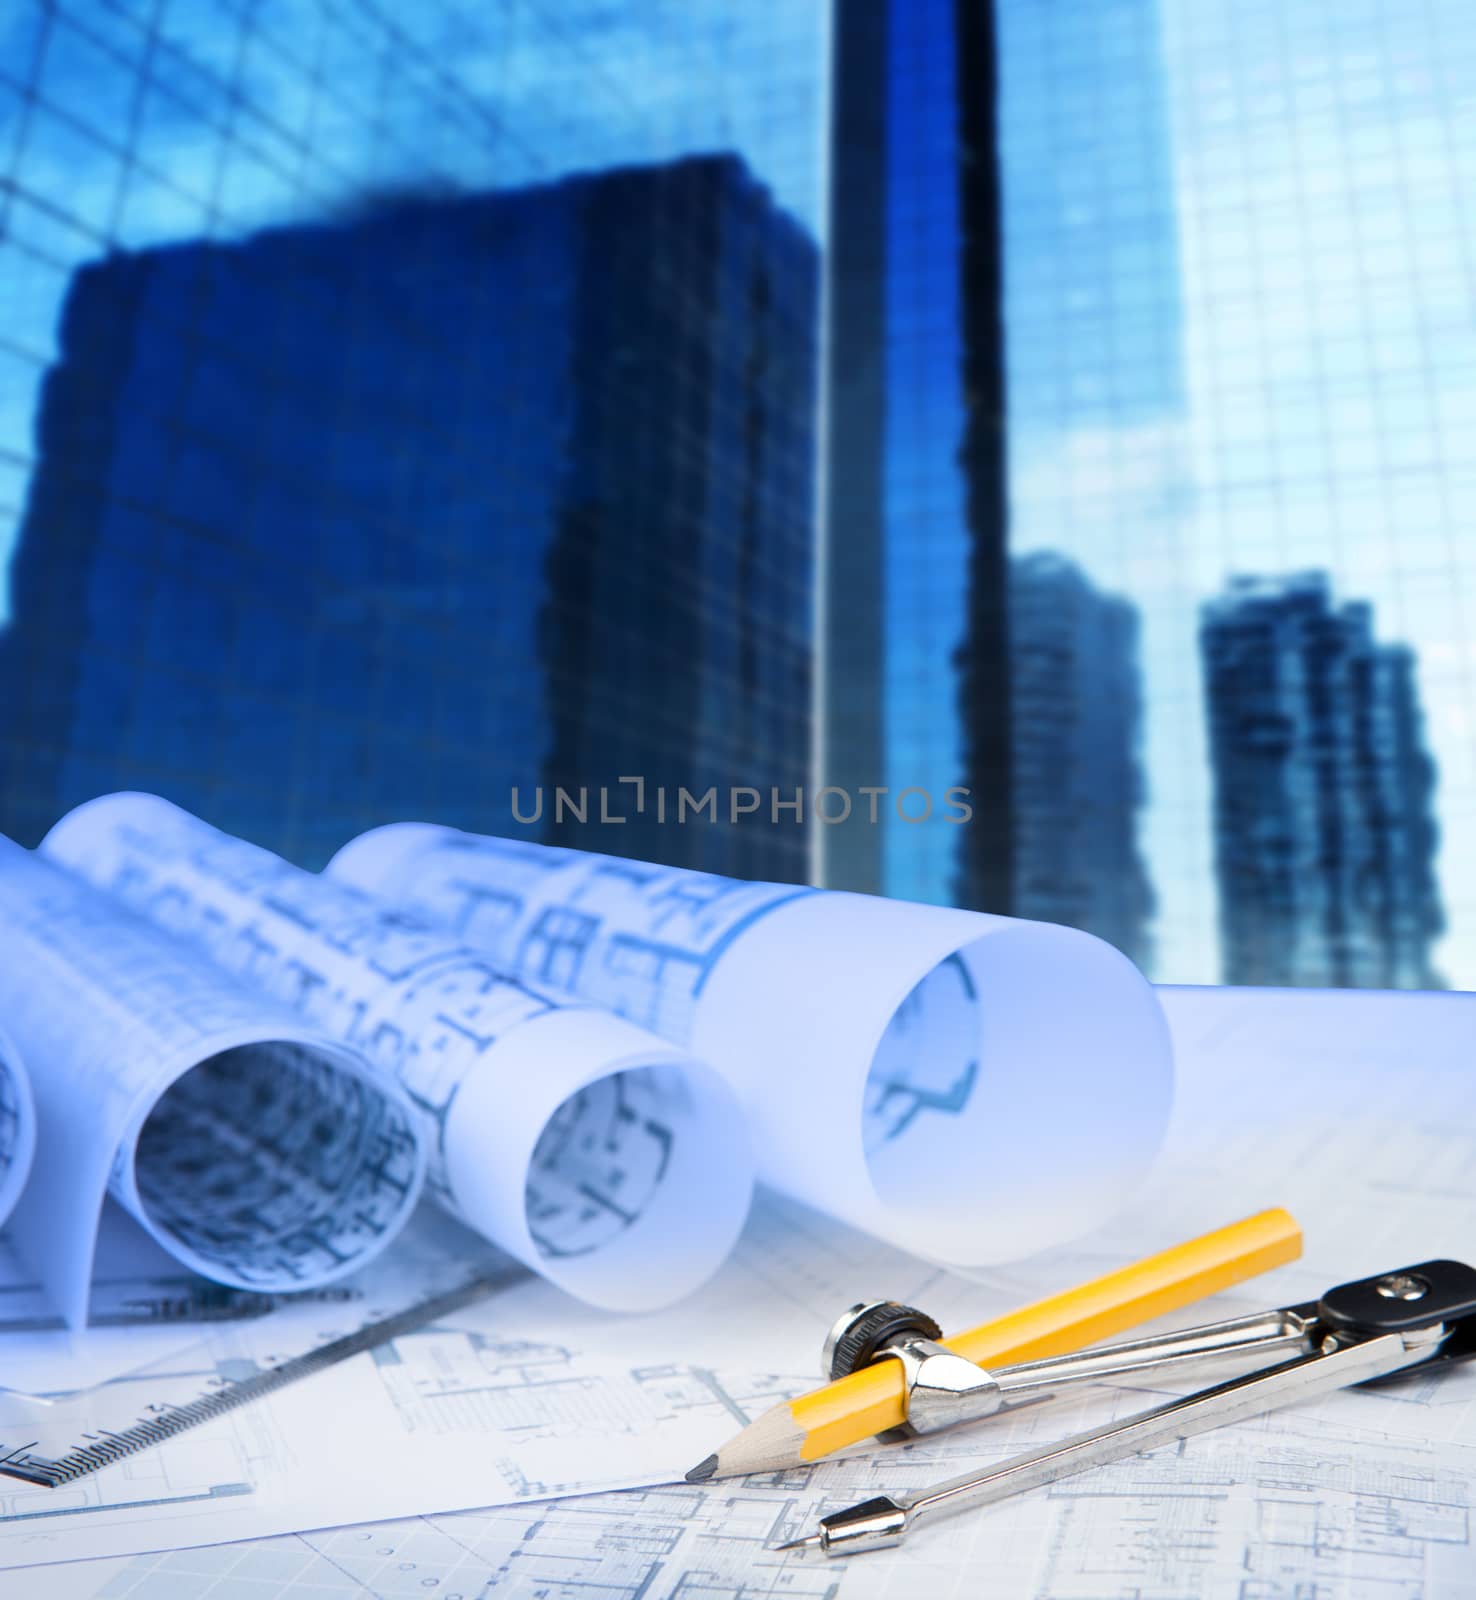 compass pencil blue print and office building in background use for construction theme